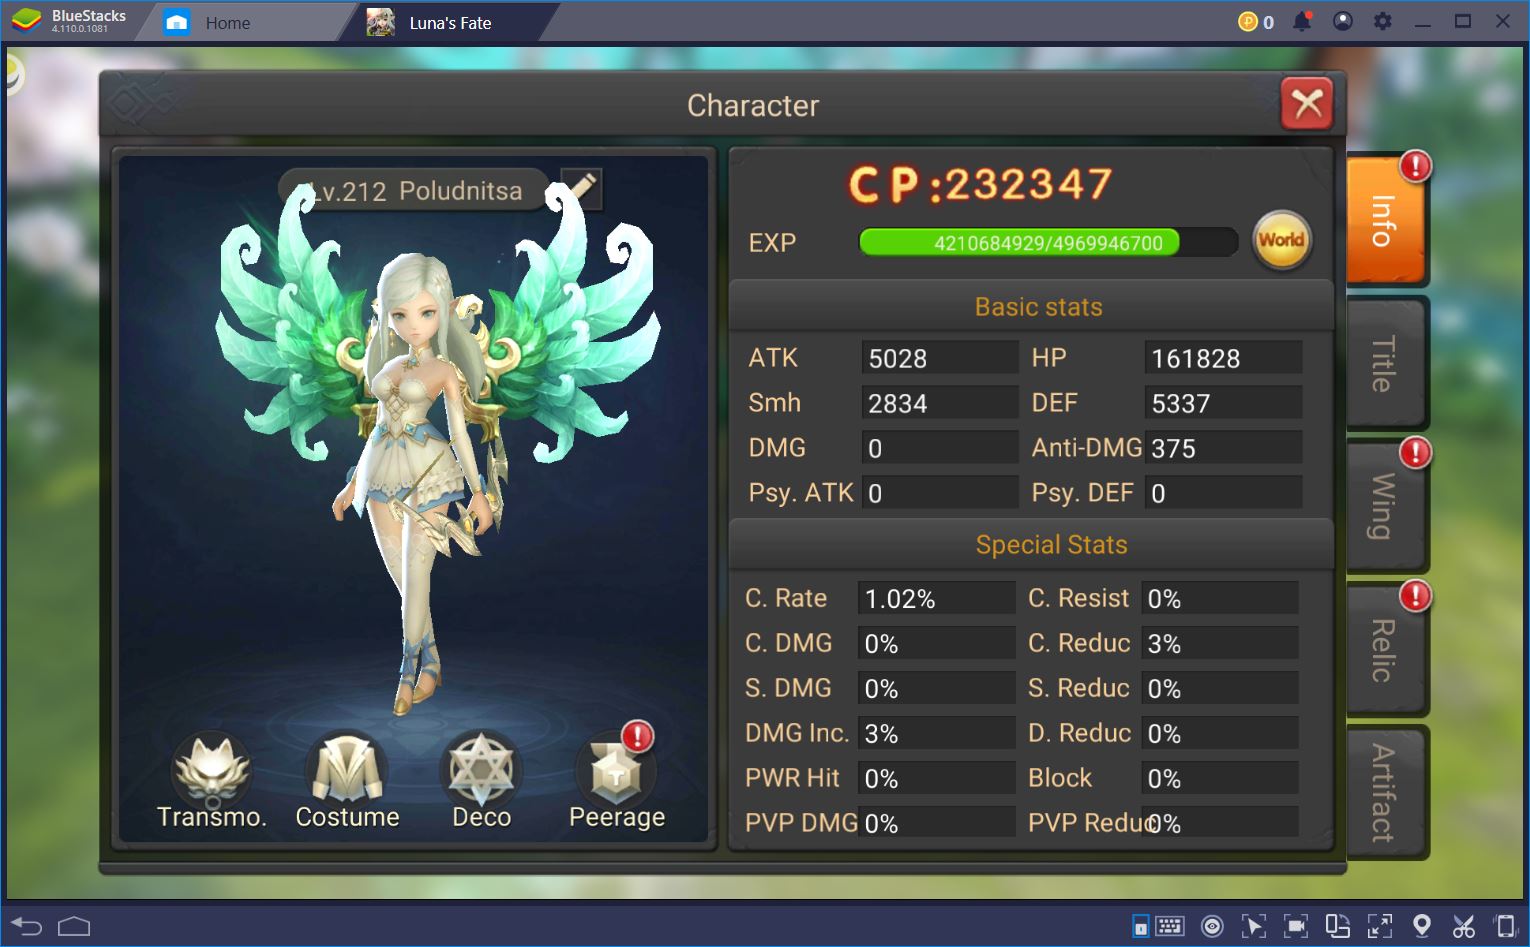 How to Play Luna’s Fate on BlueStacks